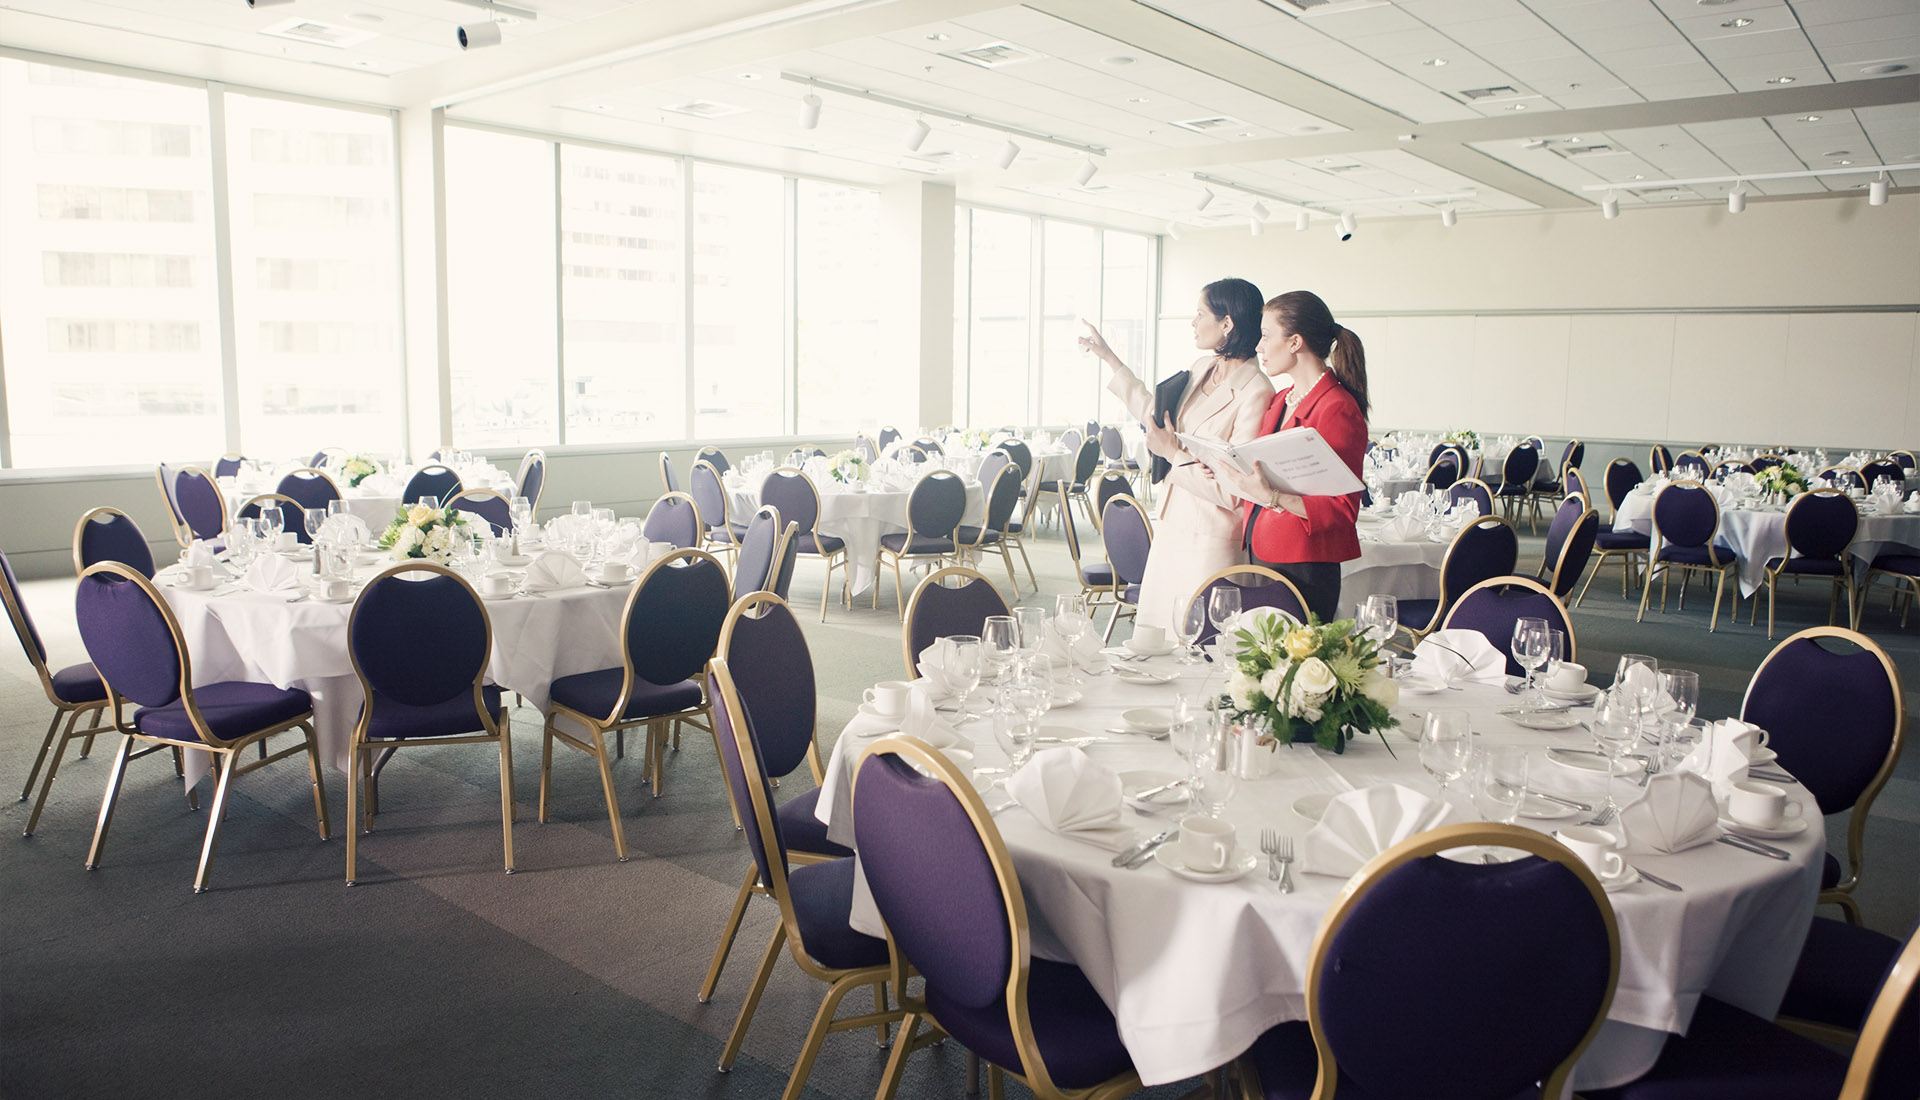 Corporate Event in A Functions Room